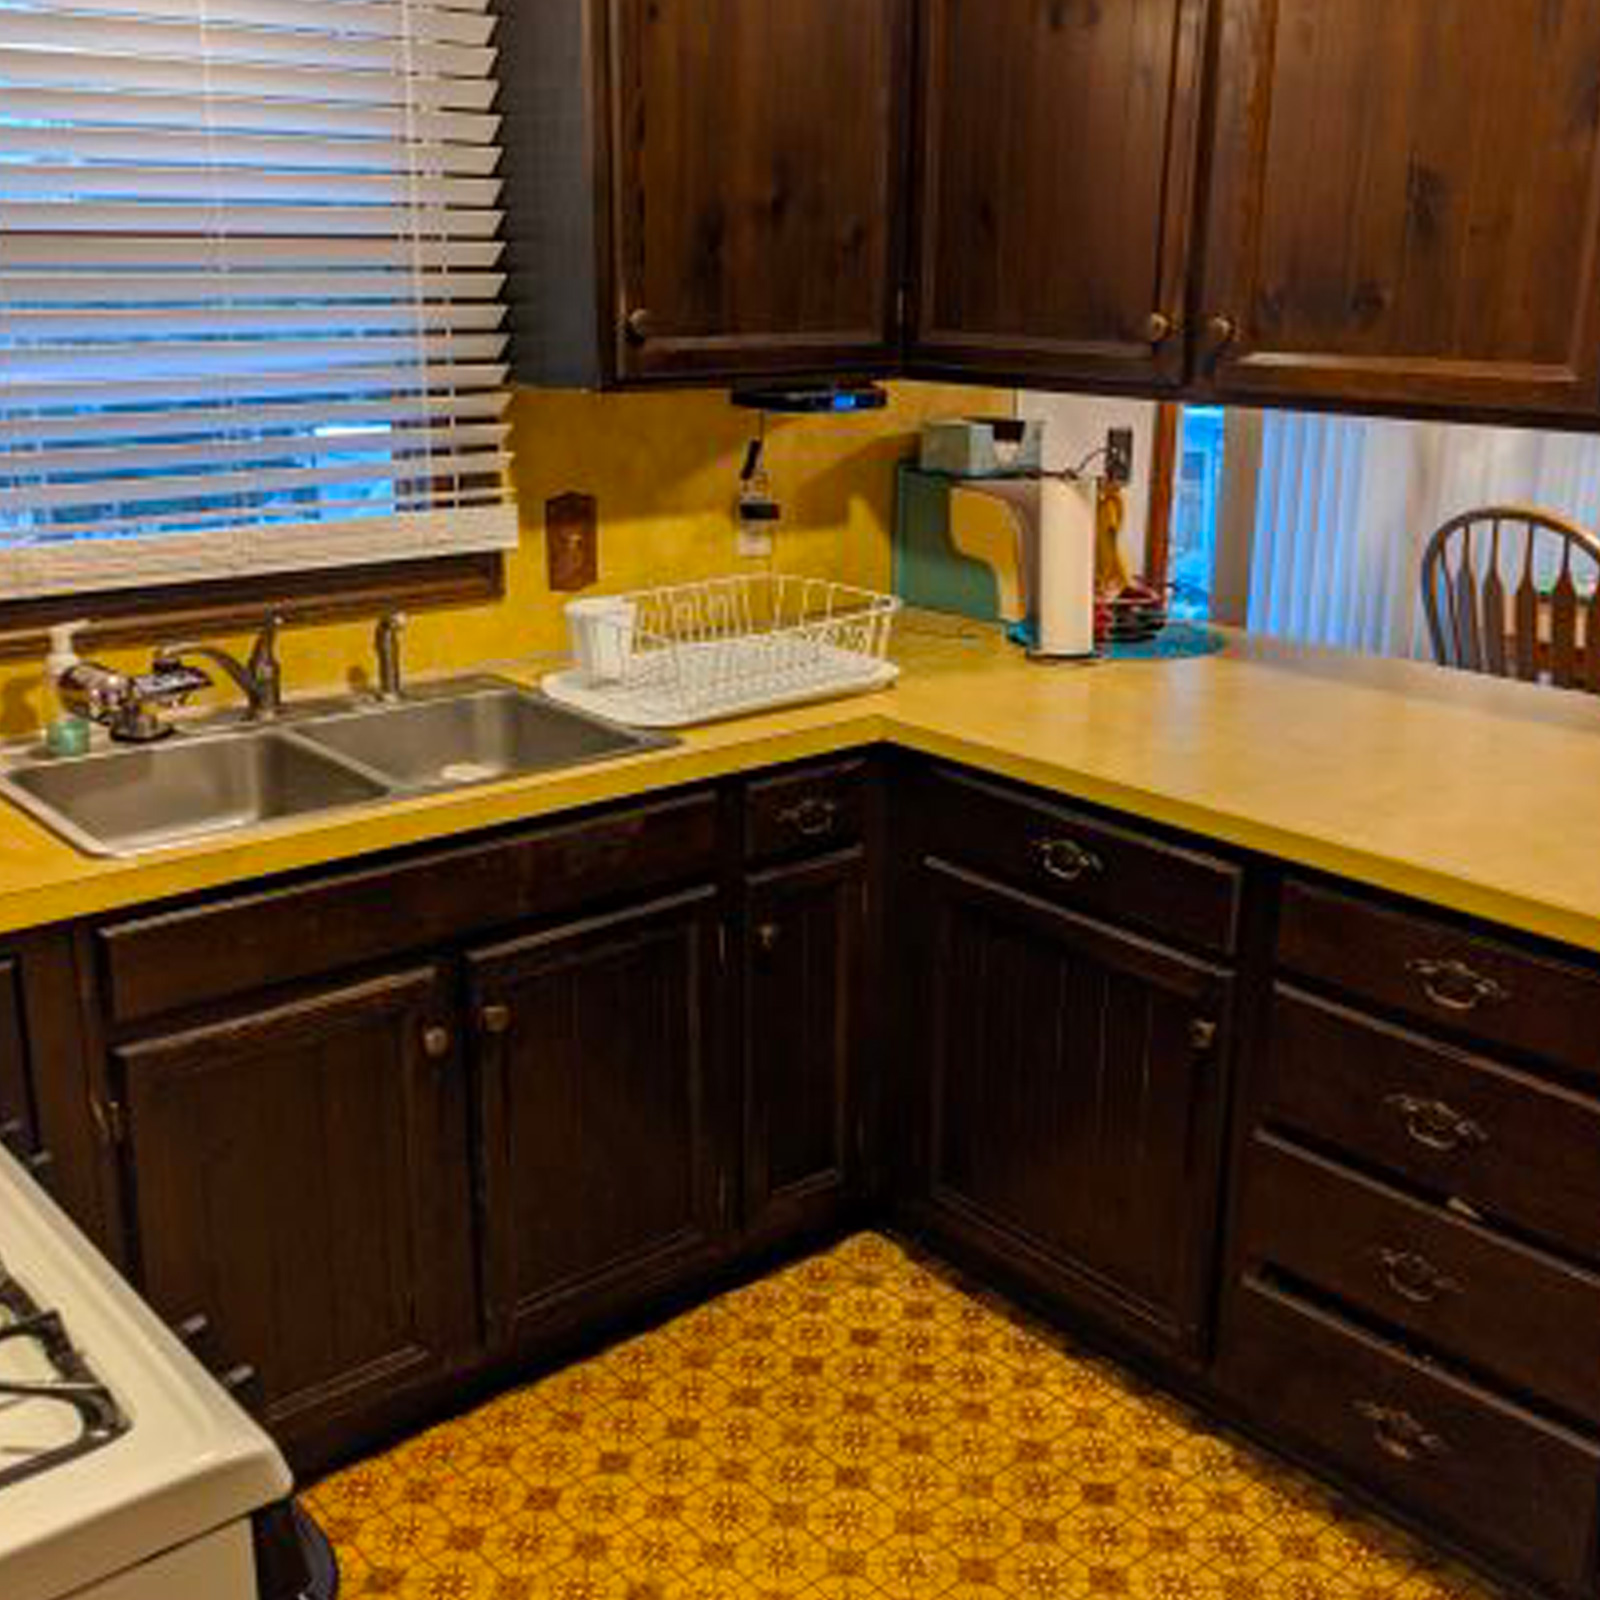 Entry 98 - These outdated cabinets & colors quickly date this kitchen